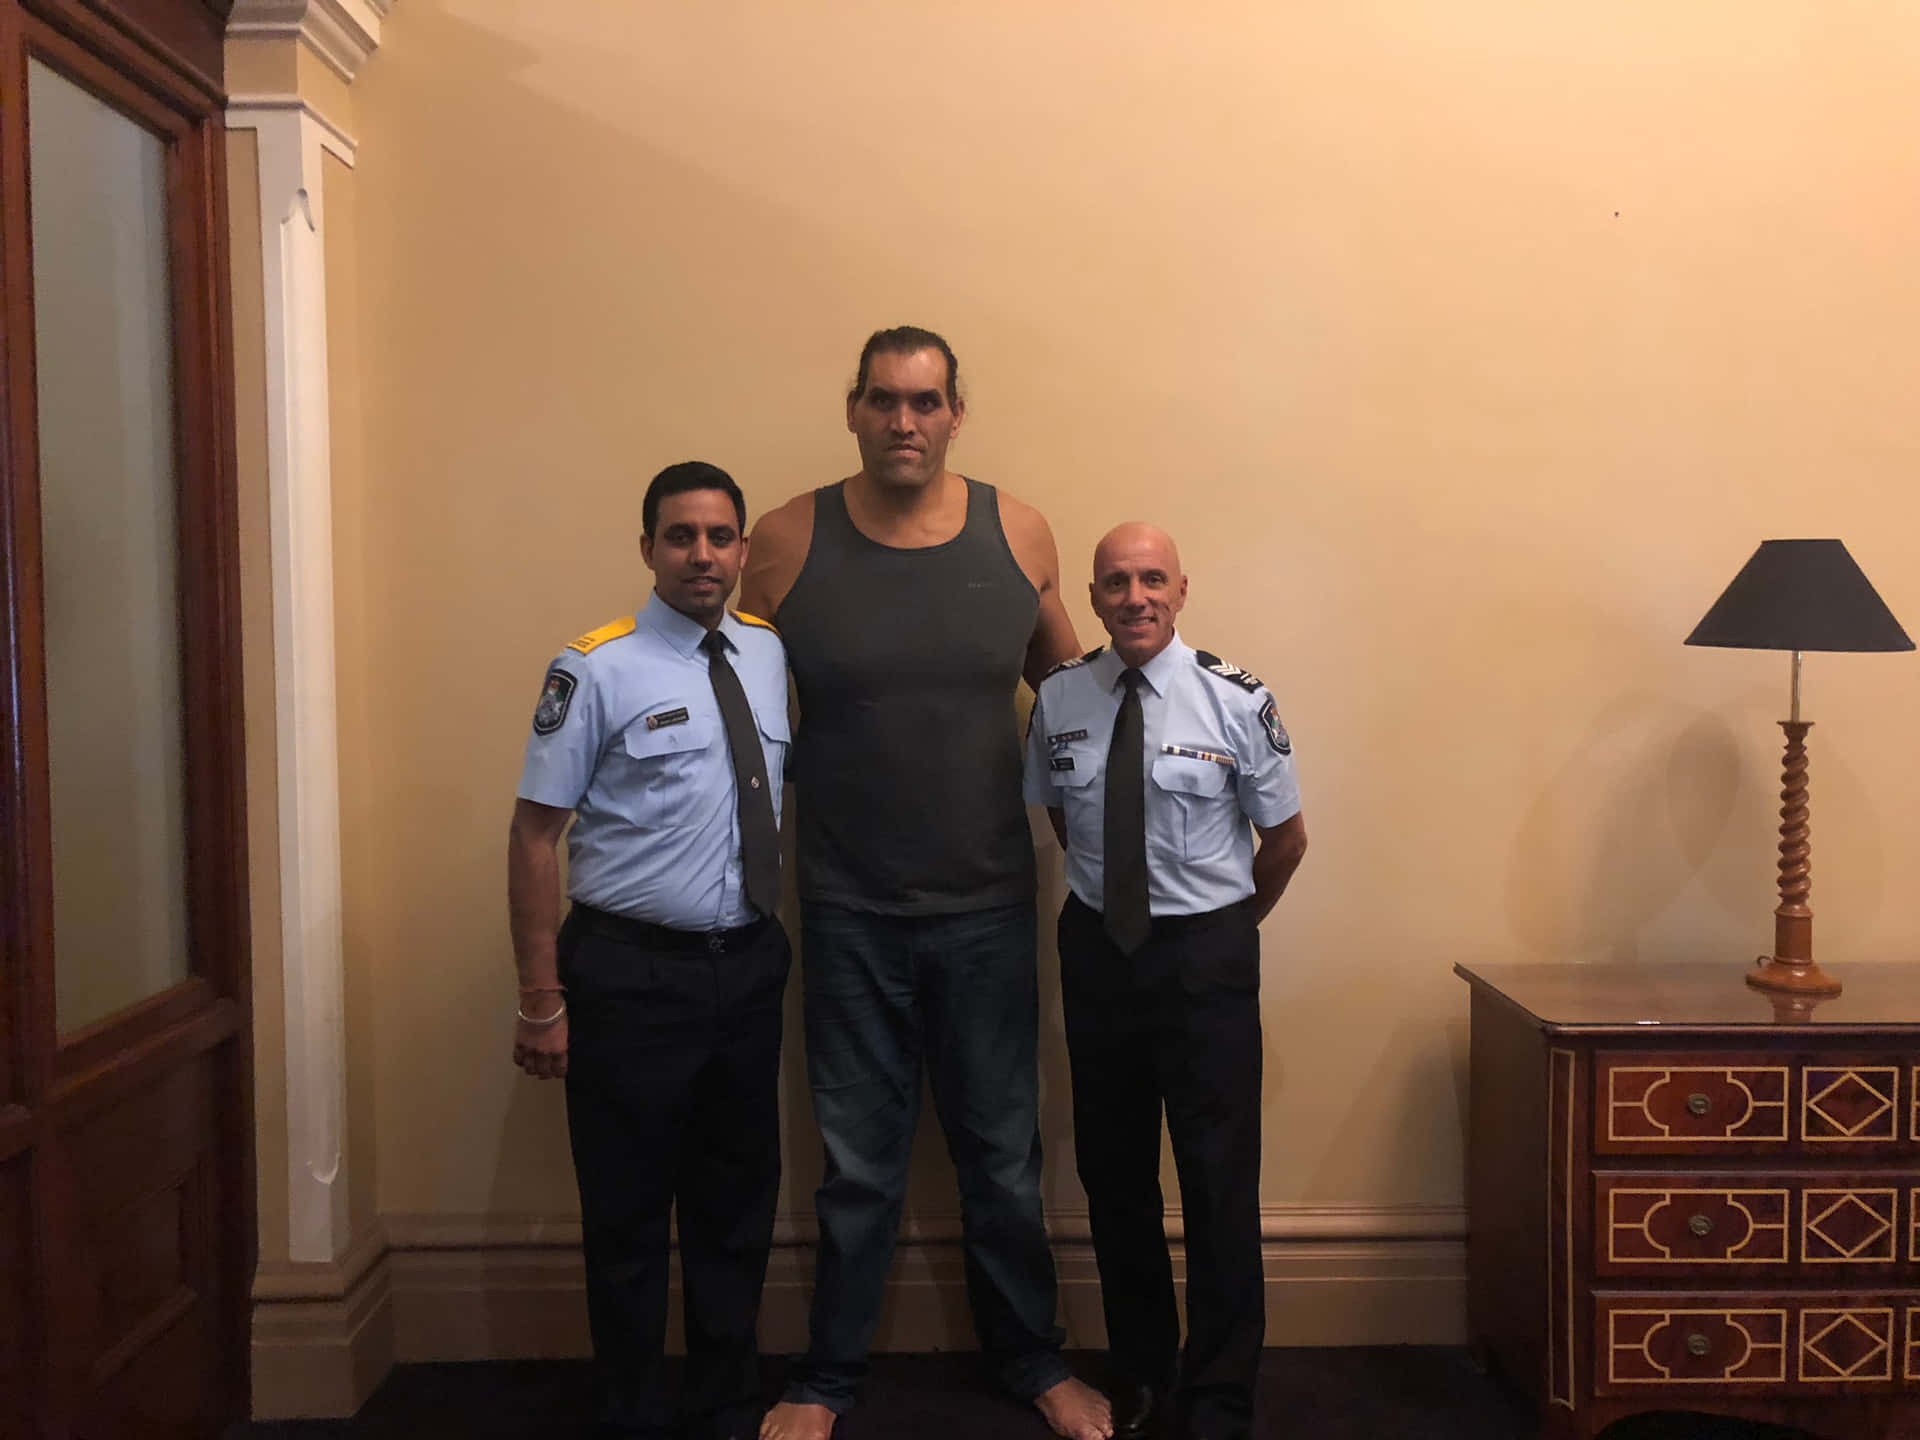 Indian Wrestler The Great Khali With Queensland Police Service Wallpaper